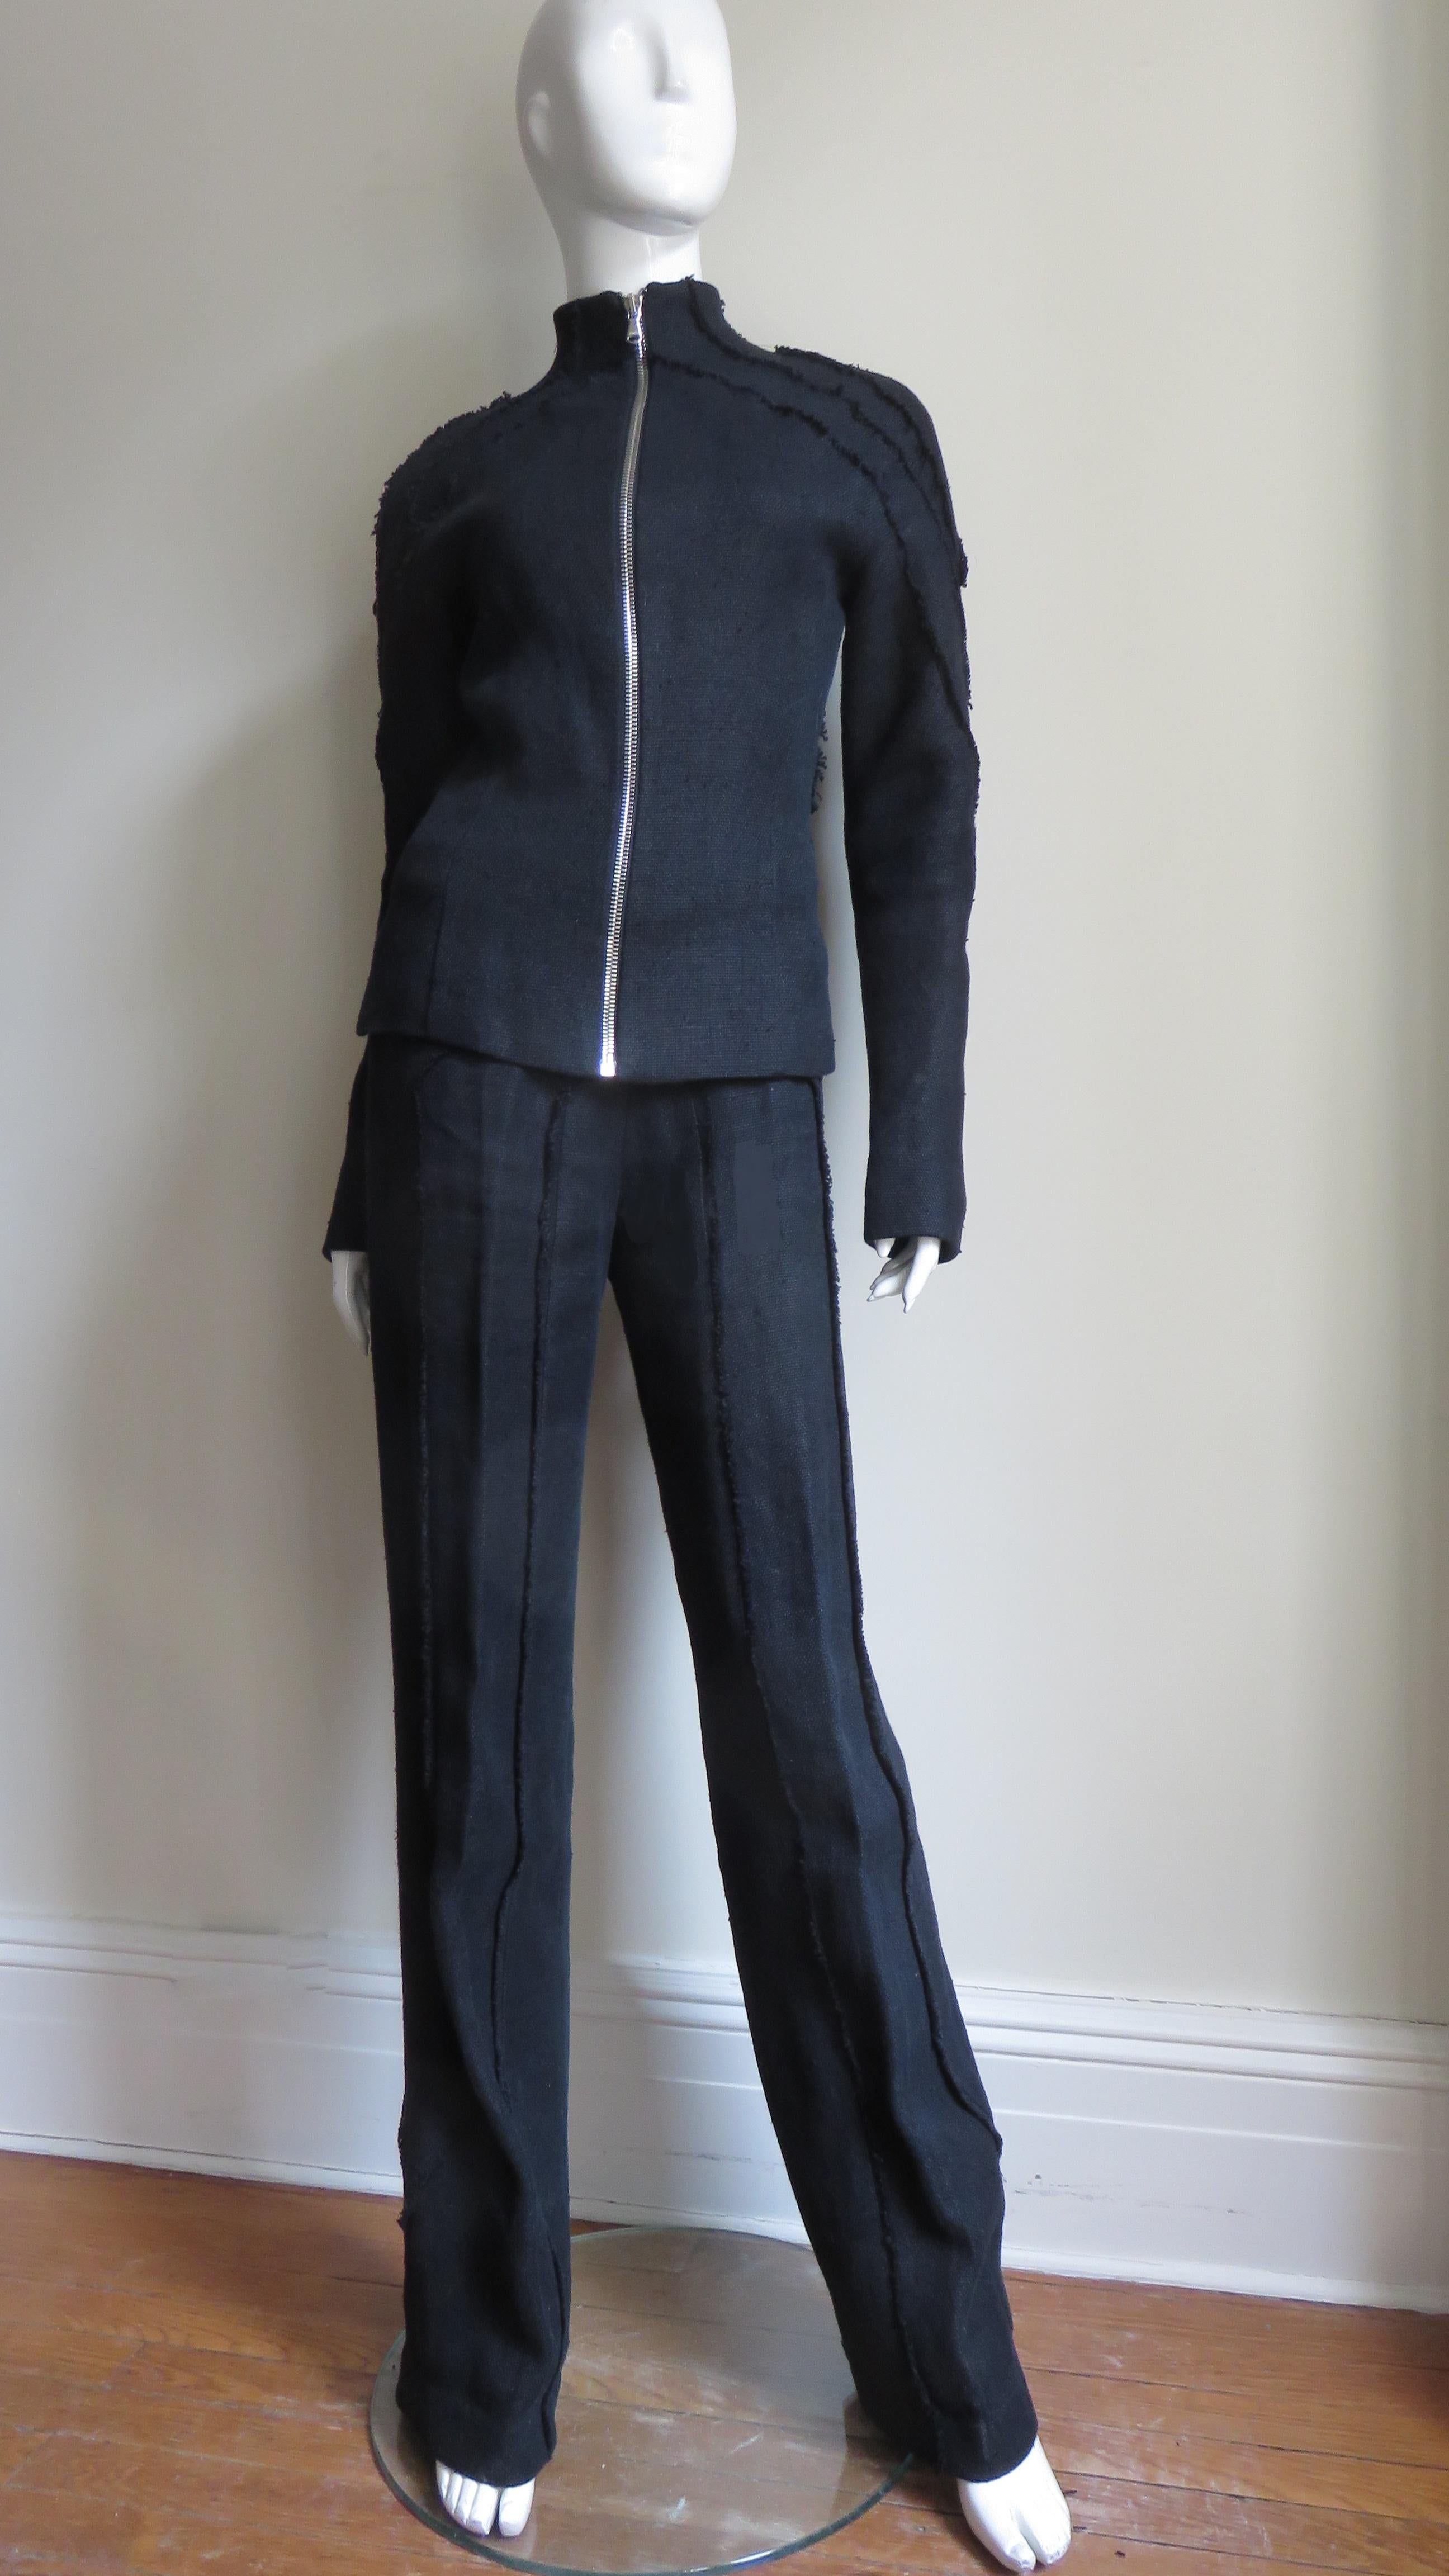 Black Alexander McQueen New Elaborately Seamed Jacket and Pants A/W 1999 For Sale